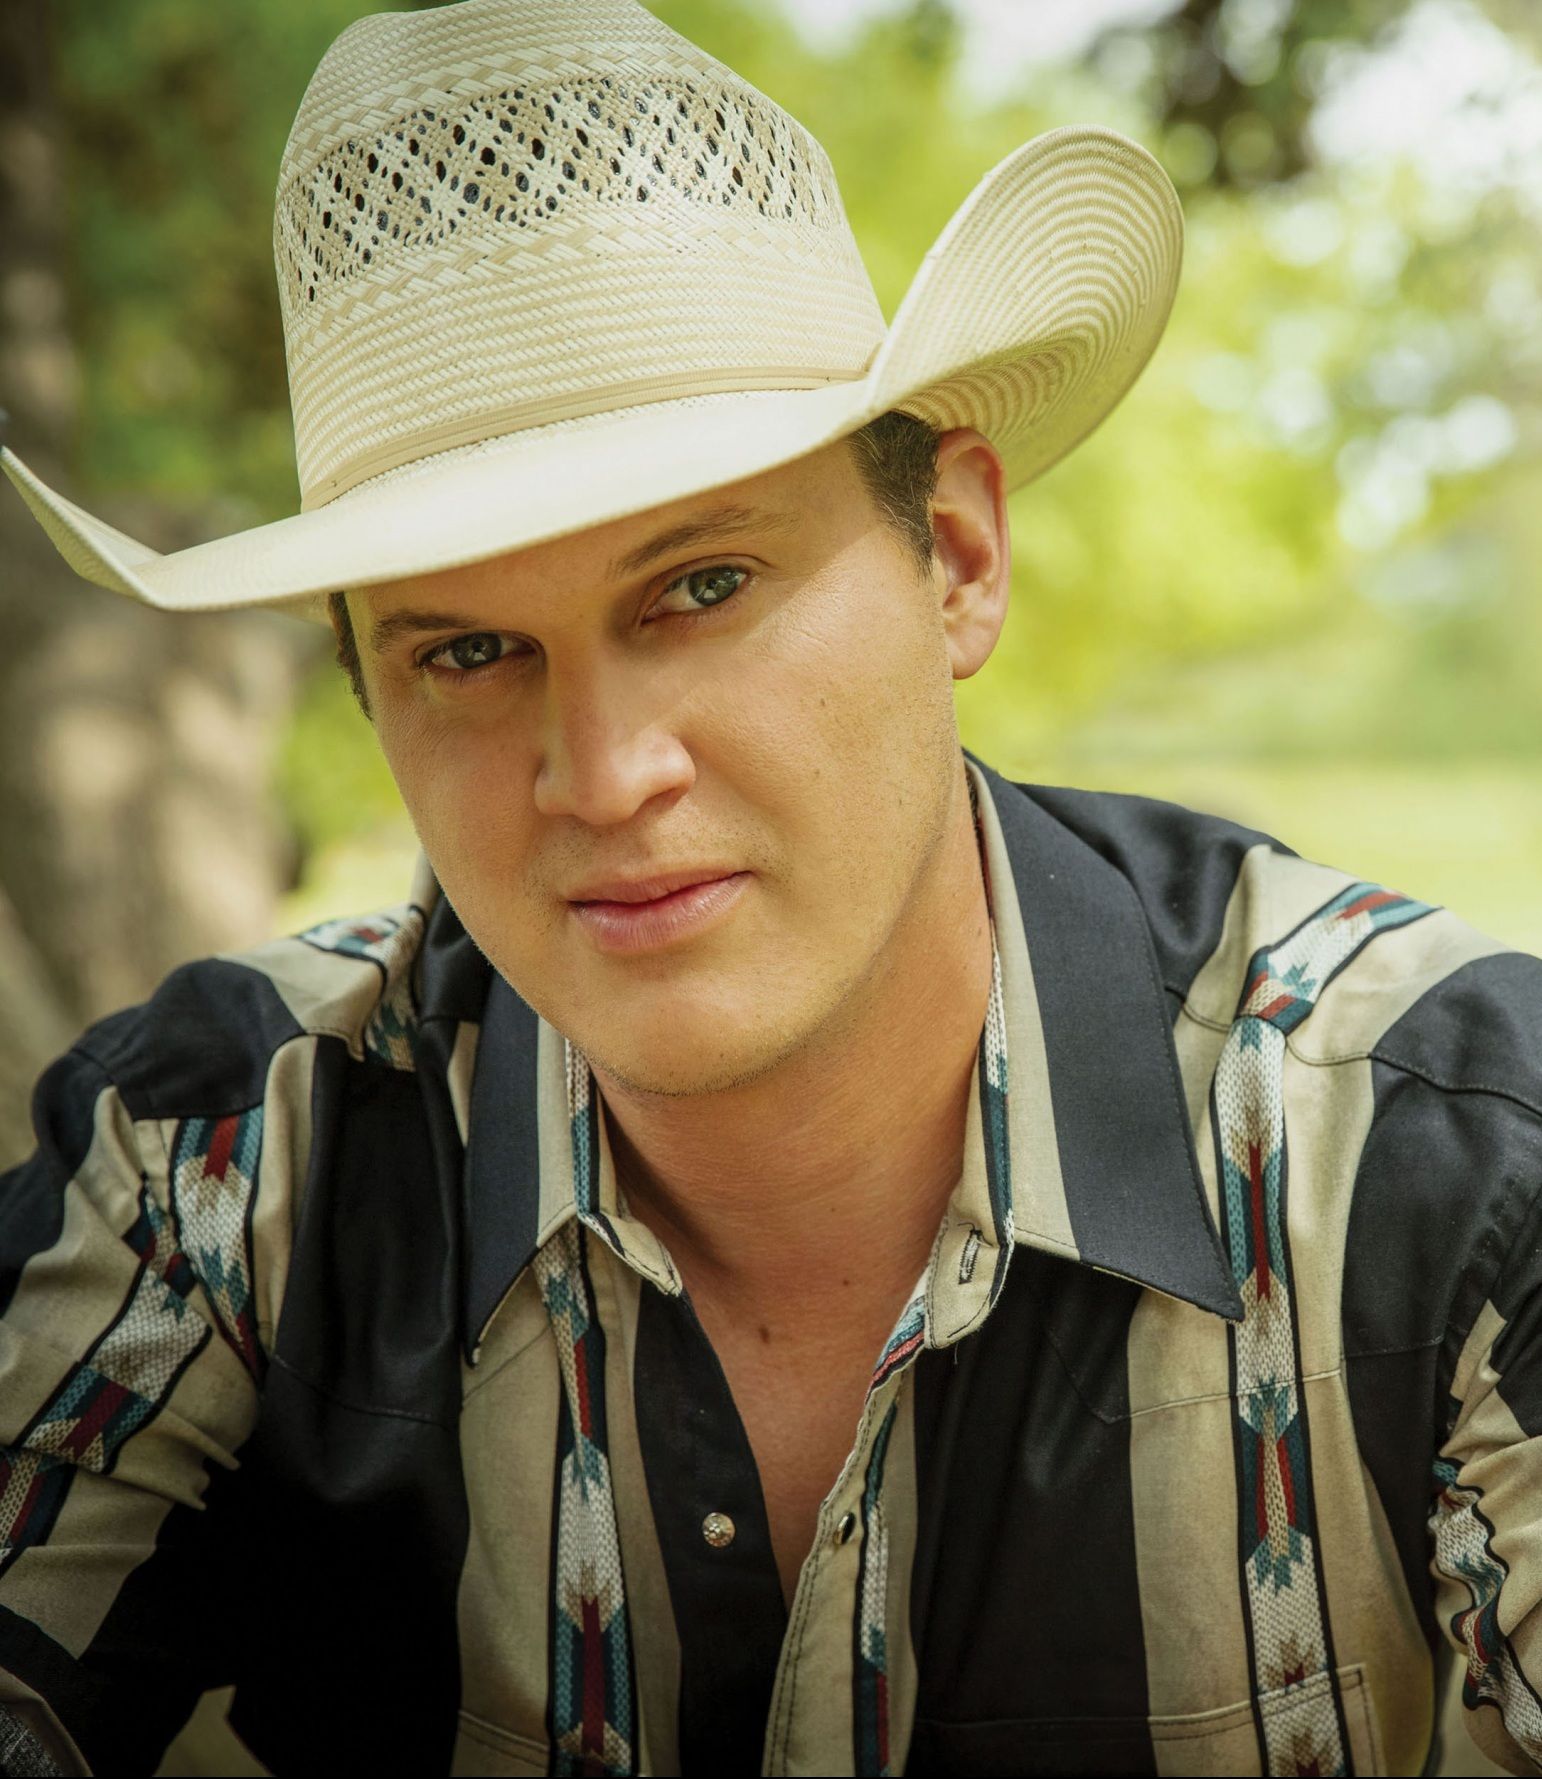 CMT TEAMS WITH COUNTRY SUPERSTAR JON PARDI